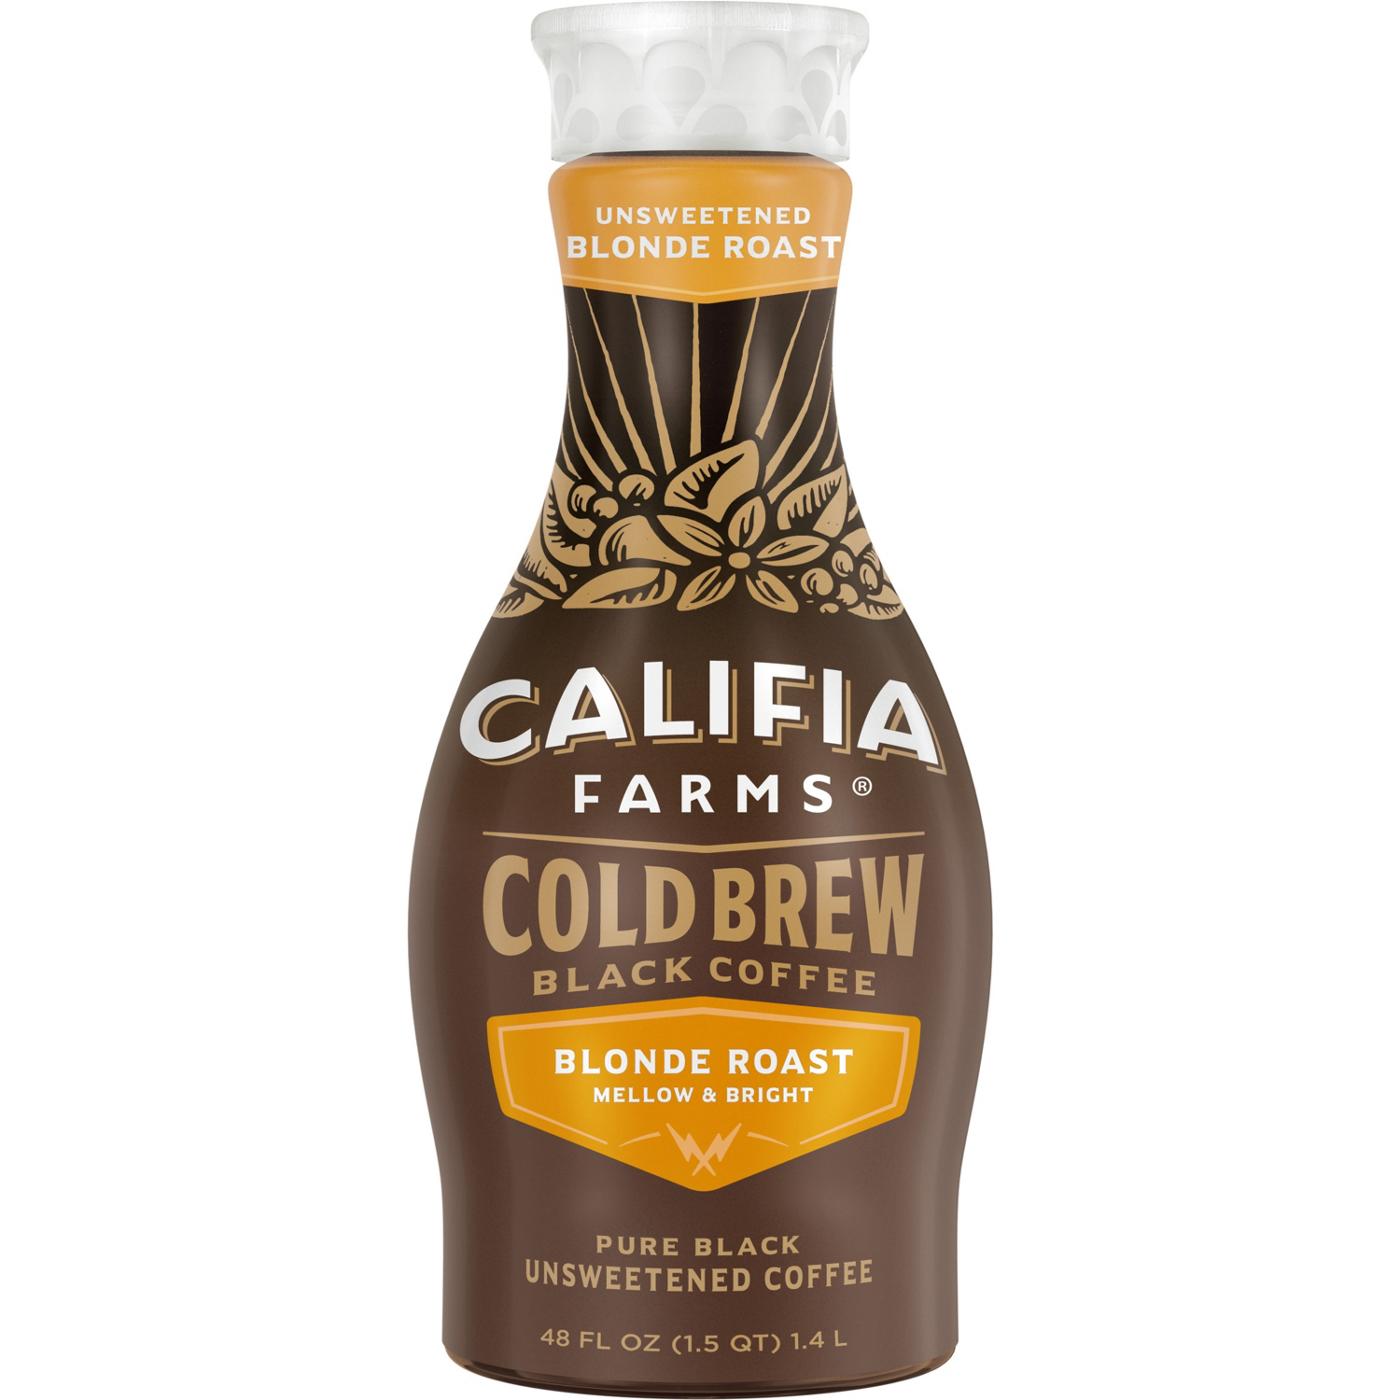 Califia Farms Pure Black Unsweetened Blonde Roast Cold Brew Coffee; image 1 of 2